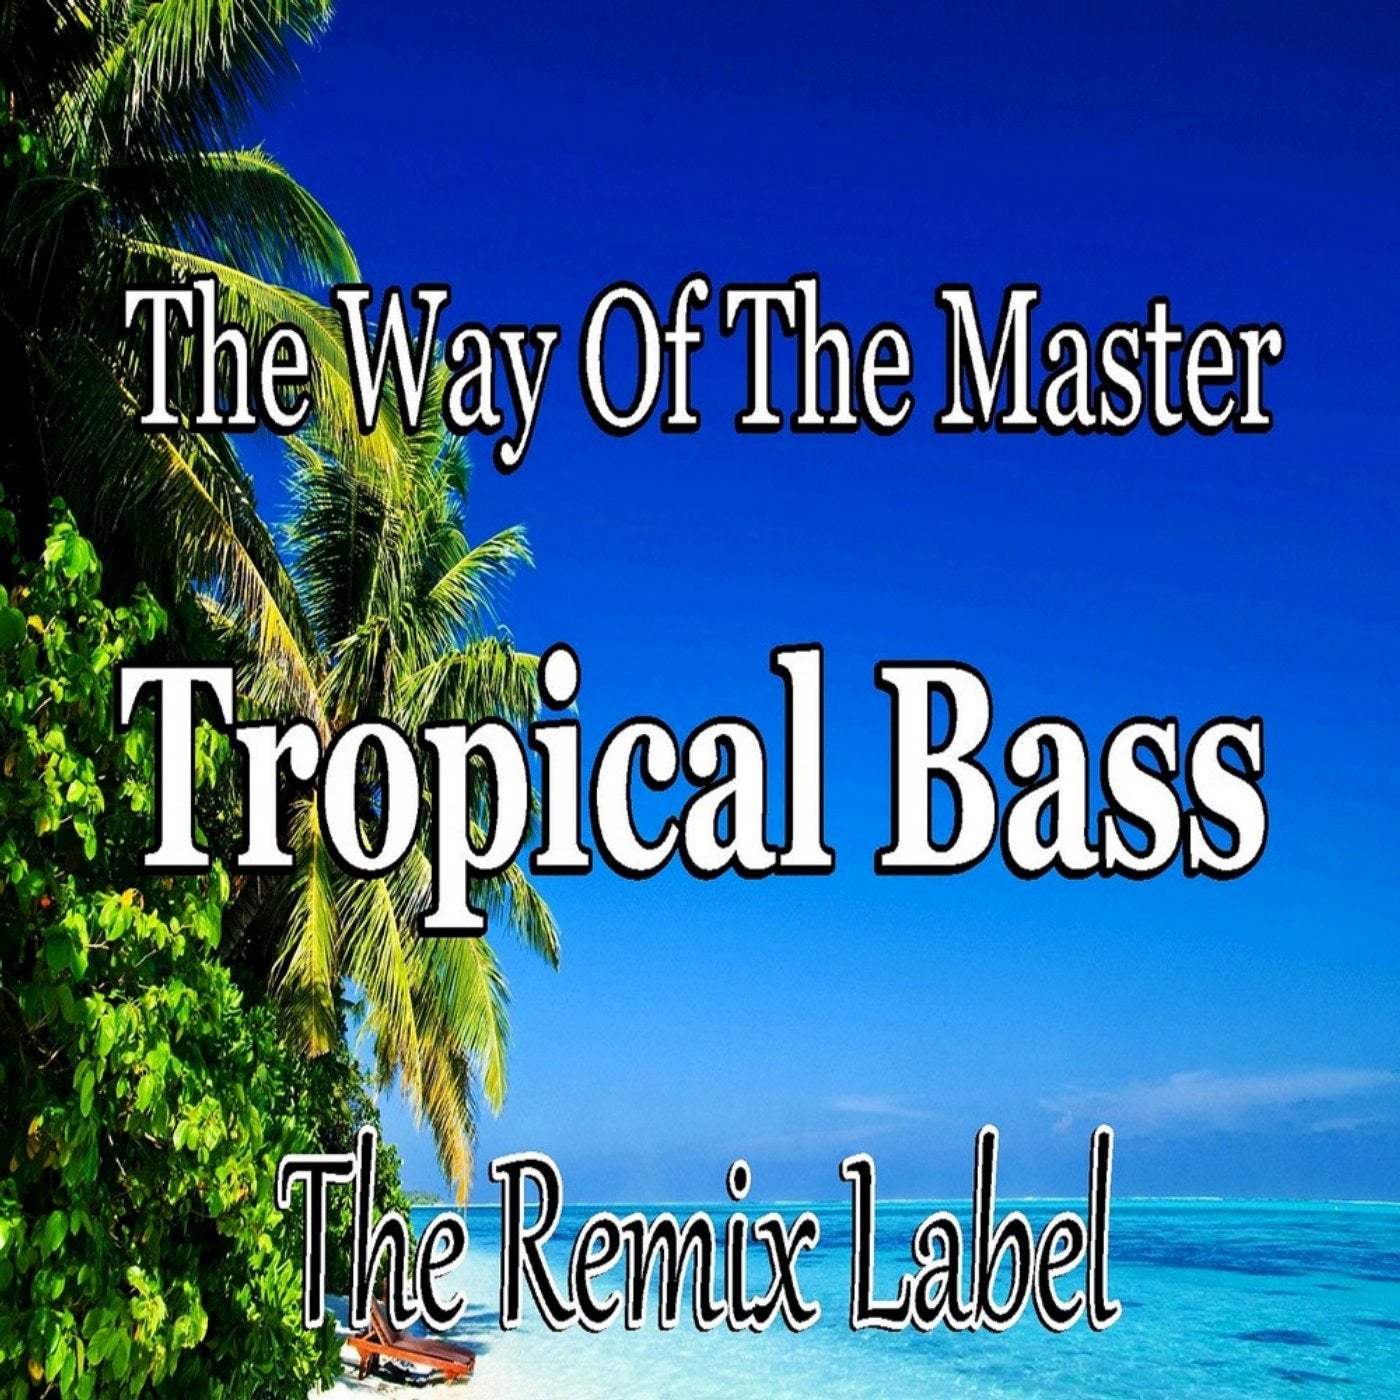 The Way Of The Master / Tropical Bass (Inspiring Proghouse Meets Vibrant Deephouse Music) - Single